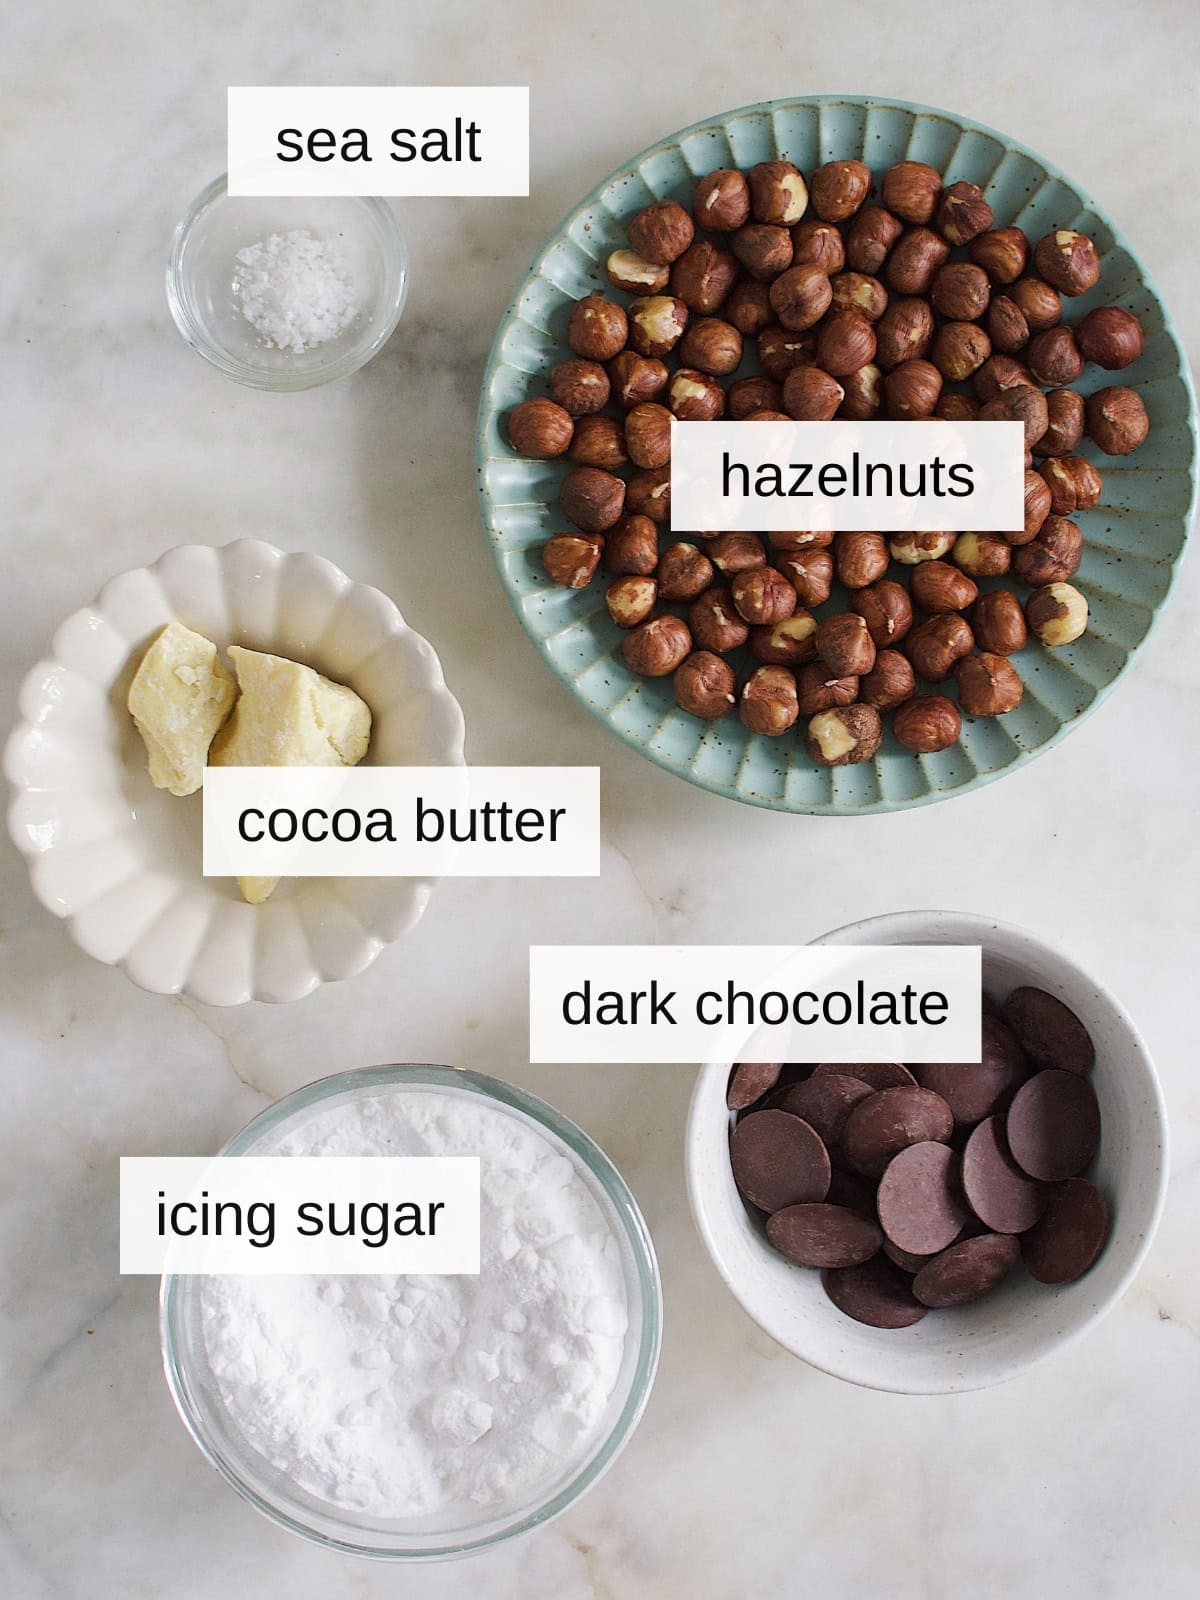 Ingredients for gianduja recipe including sea salt, hazelnuts, cocoa butter, dark chocolate, and icing sugar.